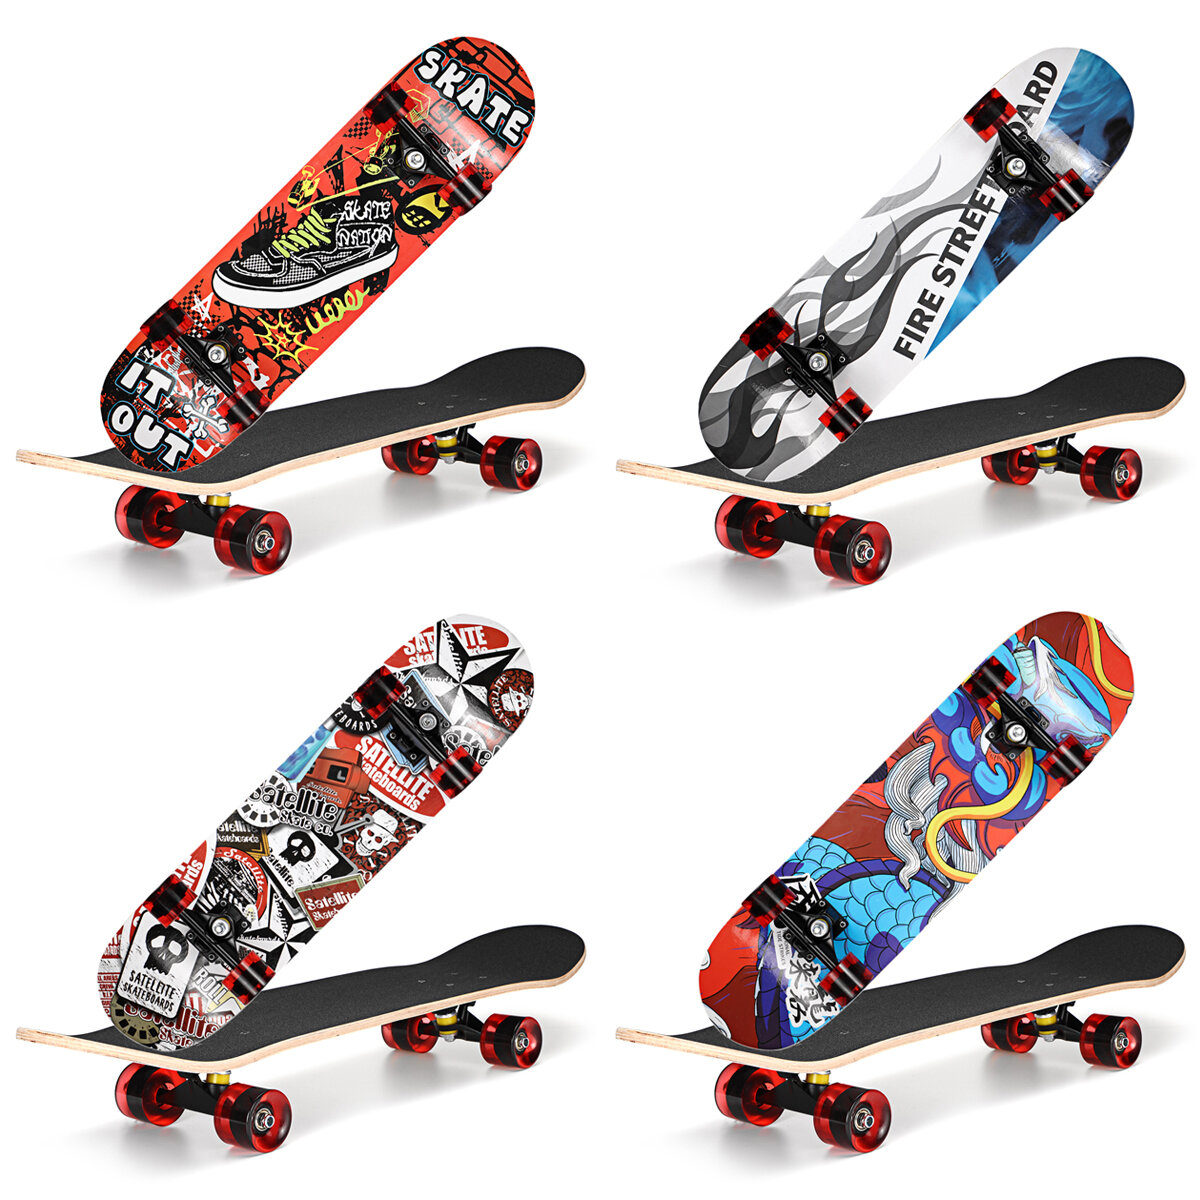 Four Wheel Complete Portable Kids Concave Skateboard Adult Scooter Four-wheel Skateboard Double Rock